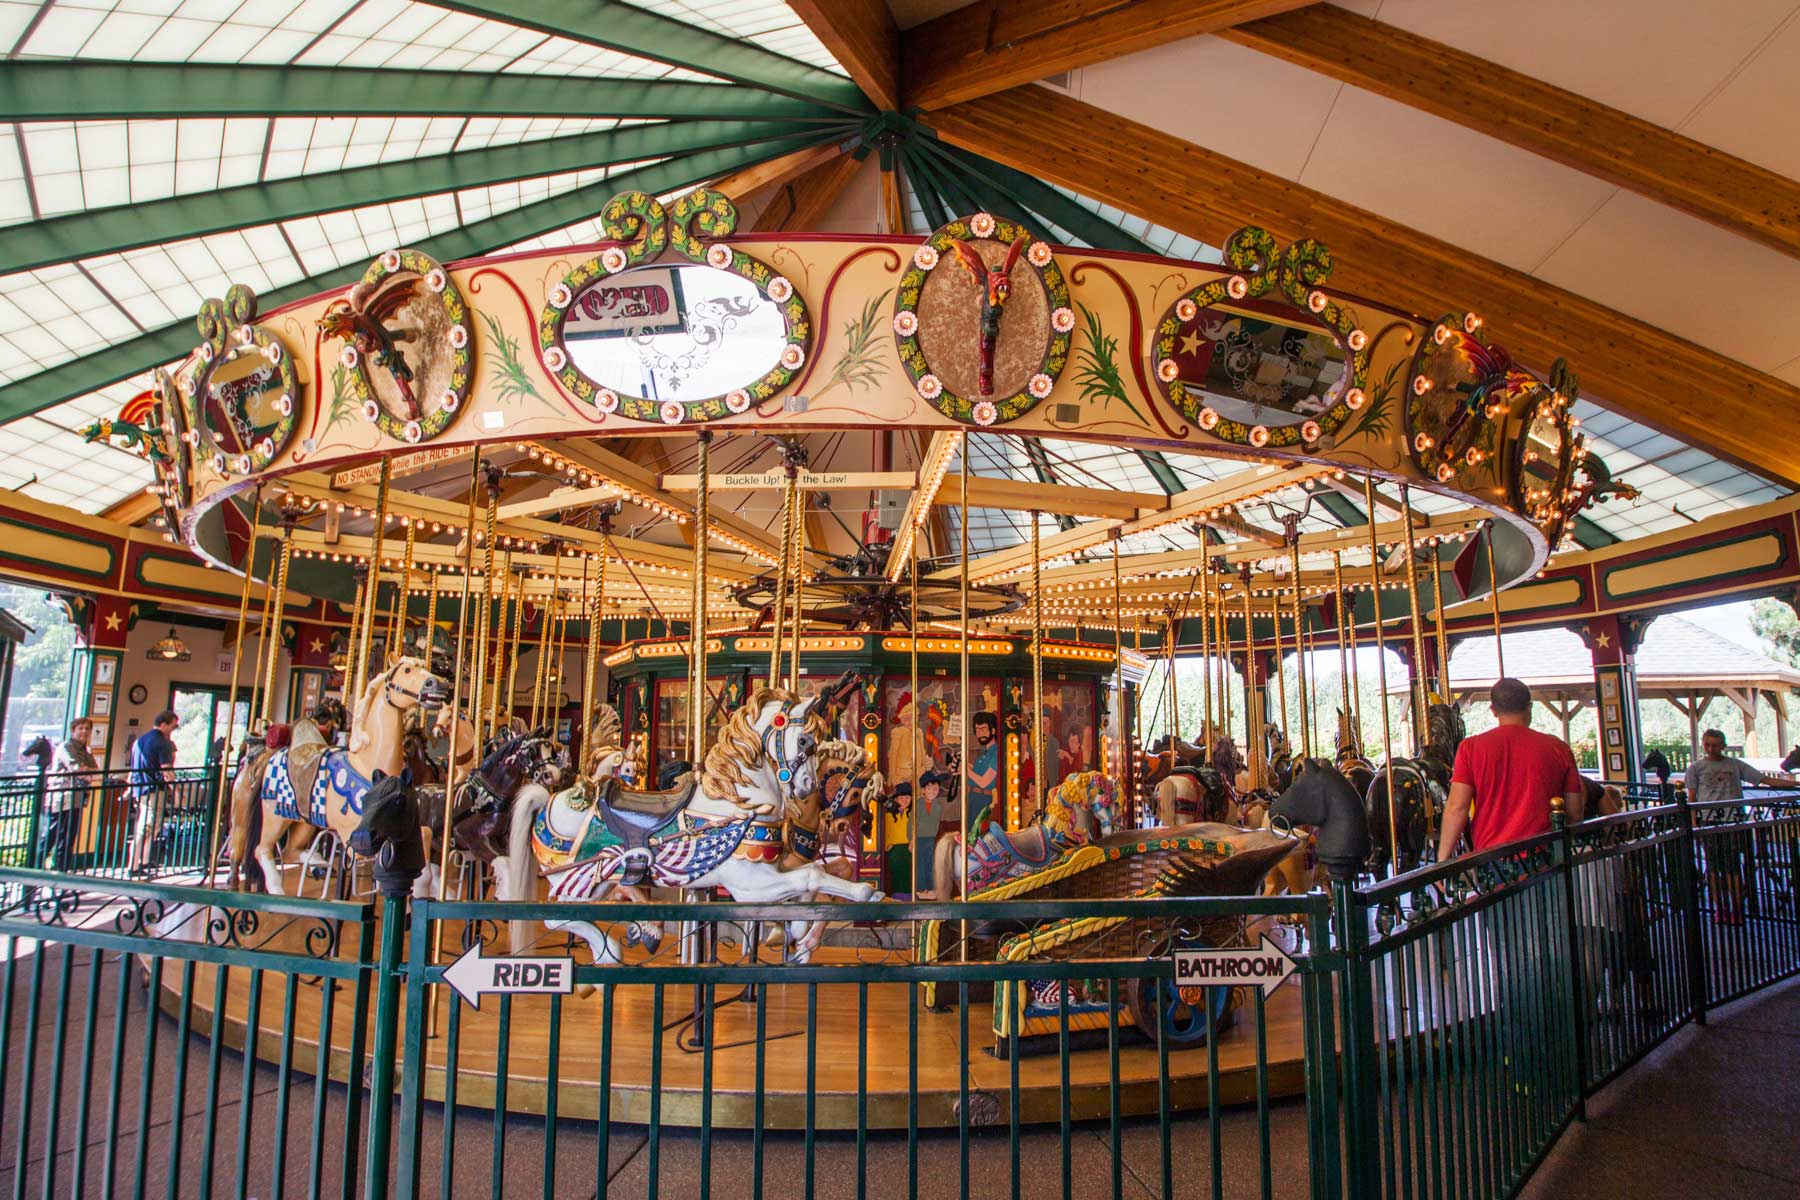 A Carousel for Missoula in Downtown Missoula